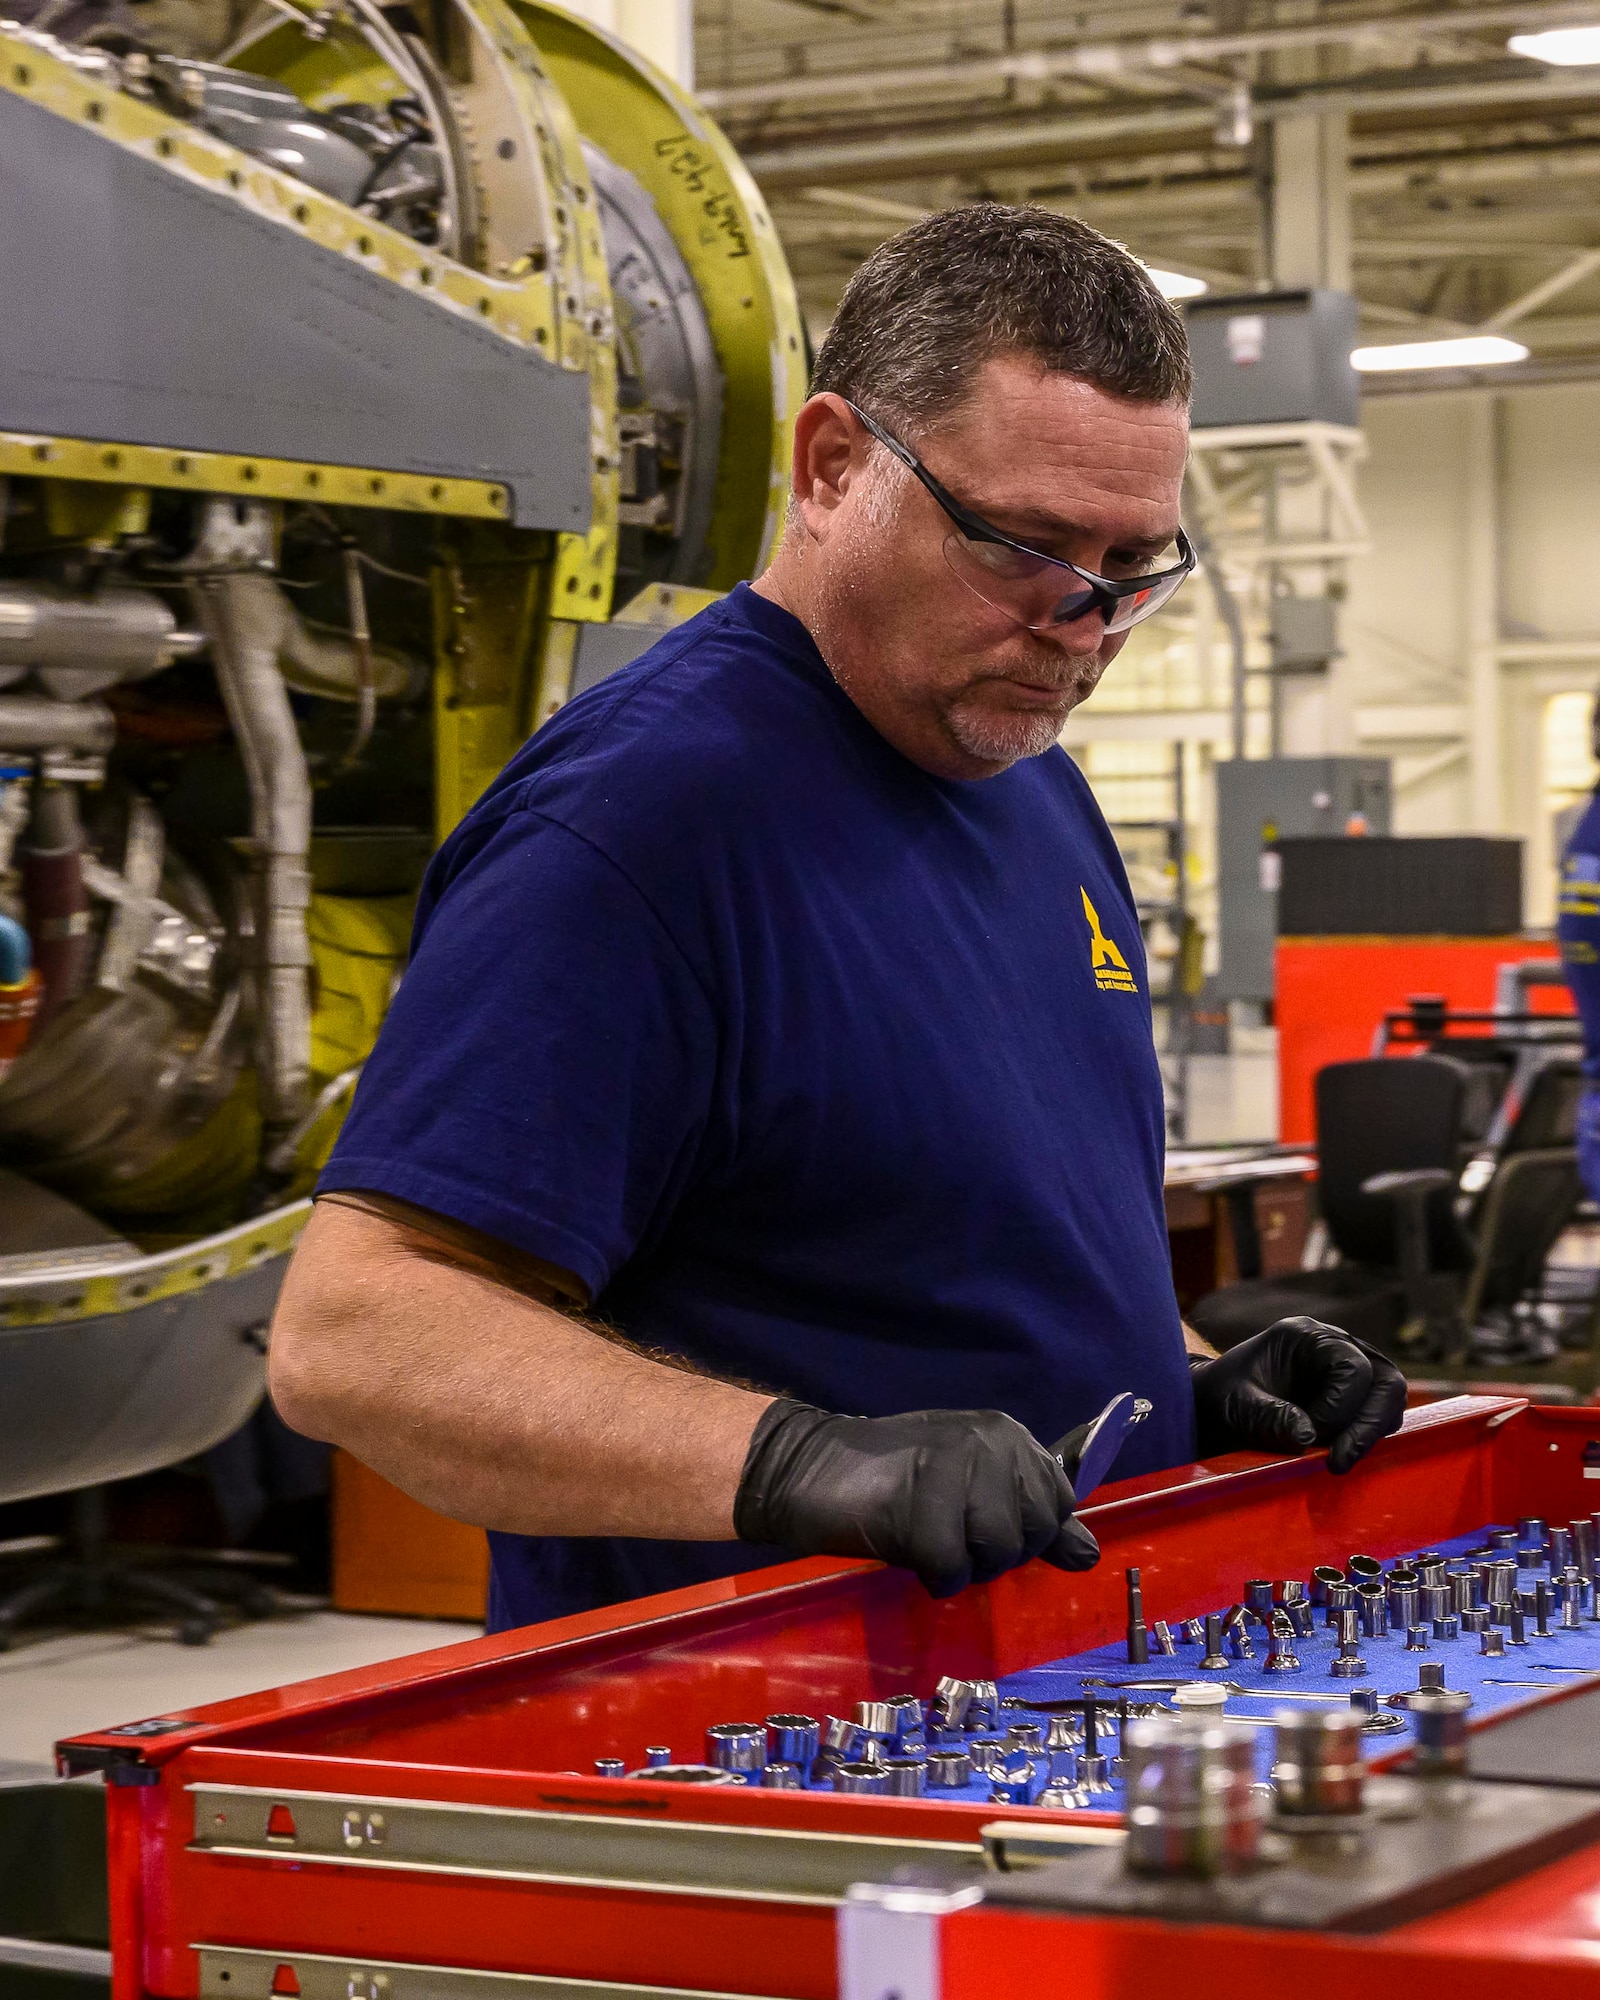 Tom Schilling, a Contract Field Team member, gathers the proper tools to complete the assembly of a refurbished engine, Dec. 29, 2020, at Little Rock Air Force Base, Ark. The facility produces all C-130H Hercules T-56 3.5 modified engine and 54H60-117 propeller overhauls for Air Force Reserve Command and various Air National Guard units. The average overhaul cost for a T-56 engine here is approximately $800,000 as compared to $1.5 million per engine from the commercial repair facility. (U.S. Air Force Reserve photo by Maj. Ashley Walker)